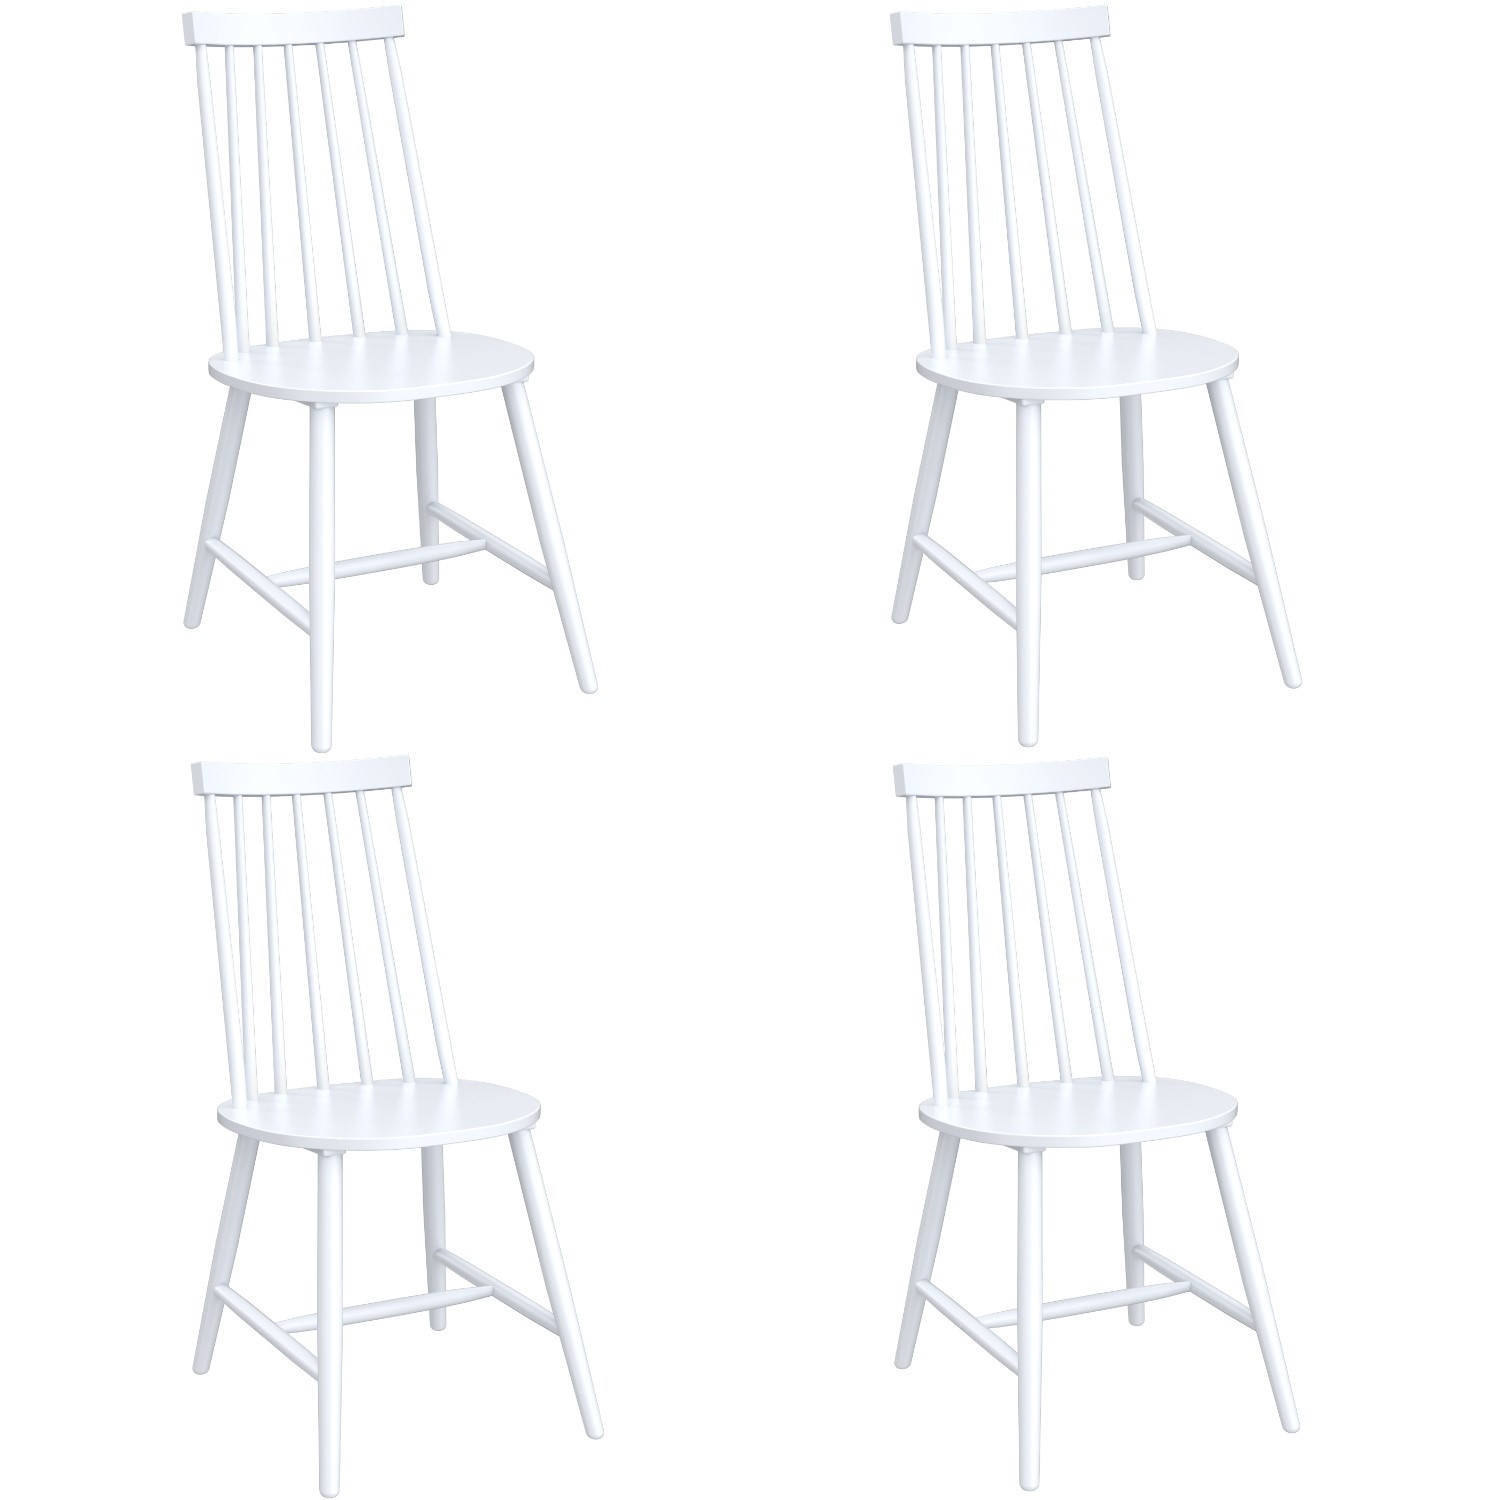 Photo of Set of 4 white wooden spindle dining chairs - cami